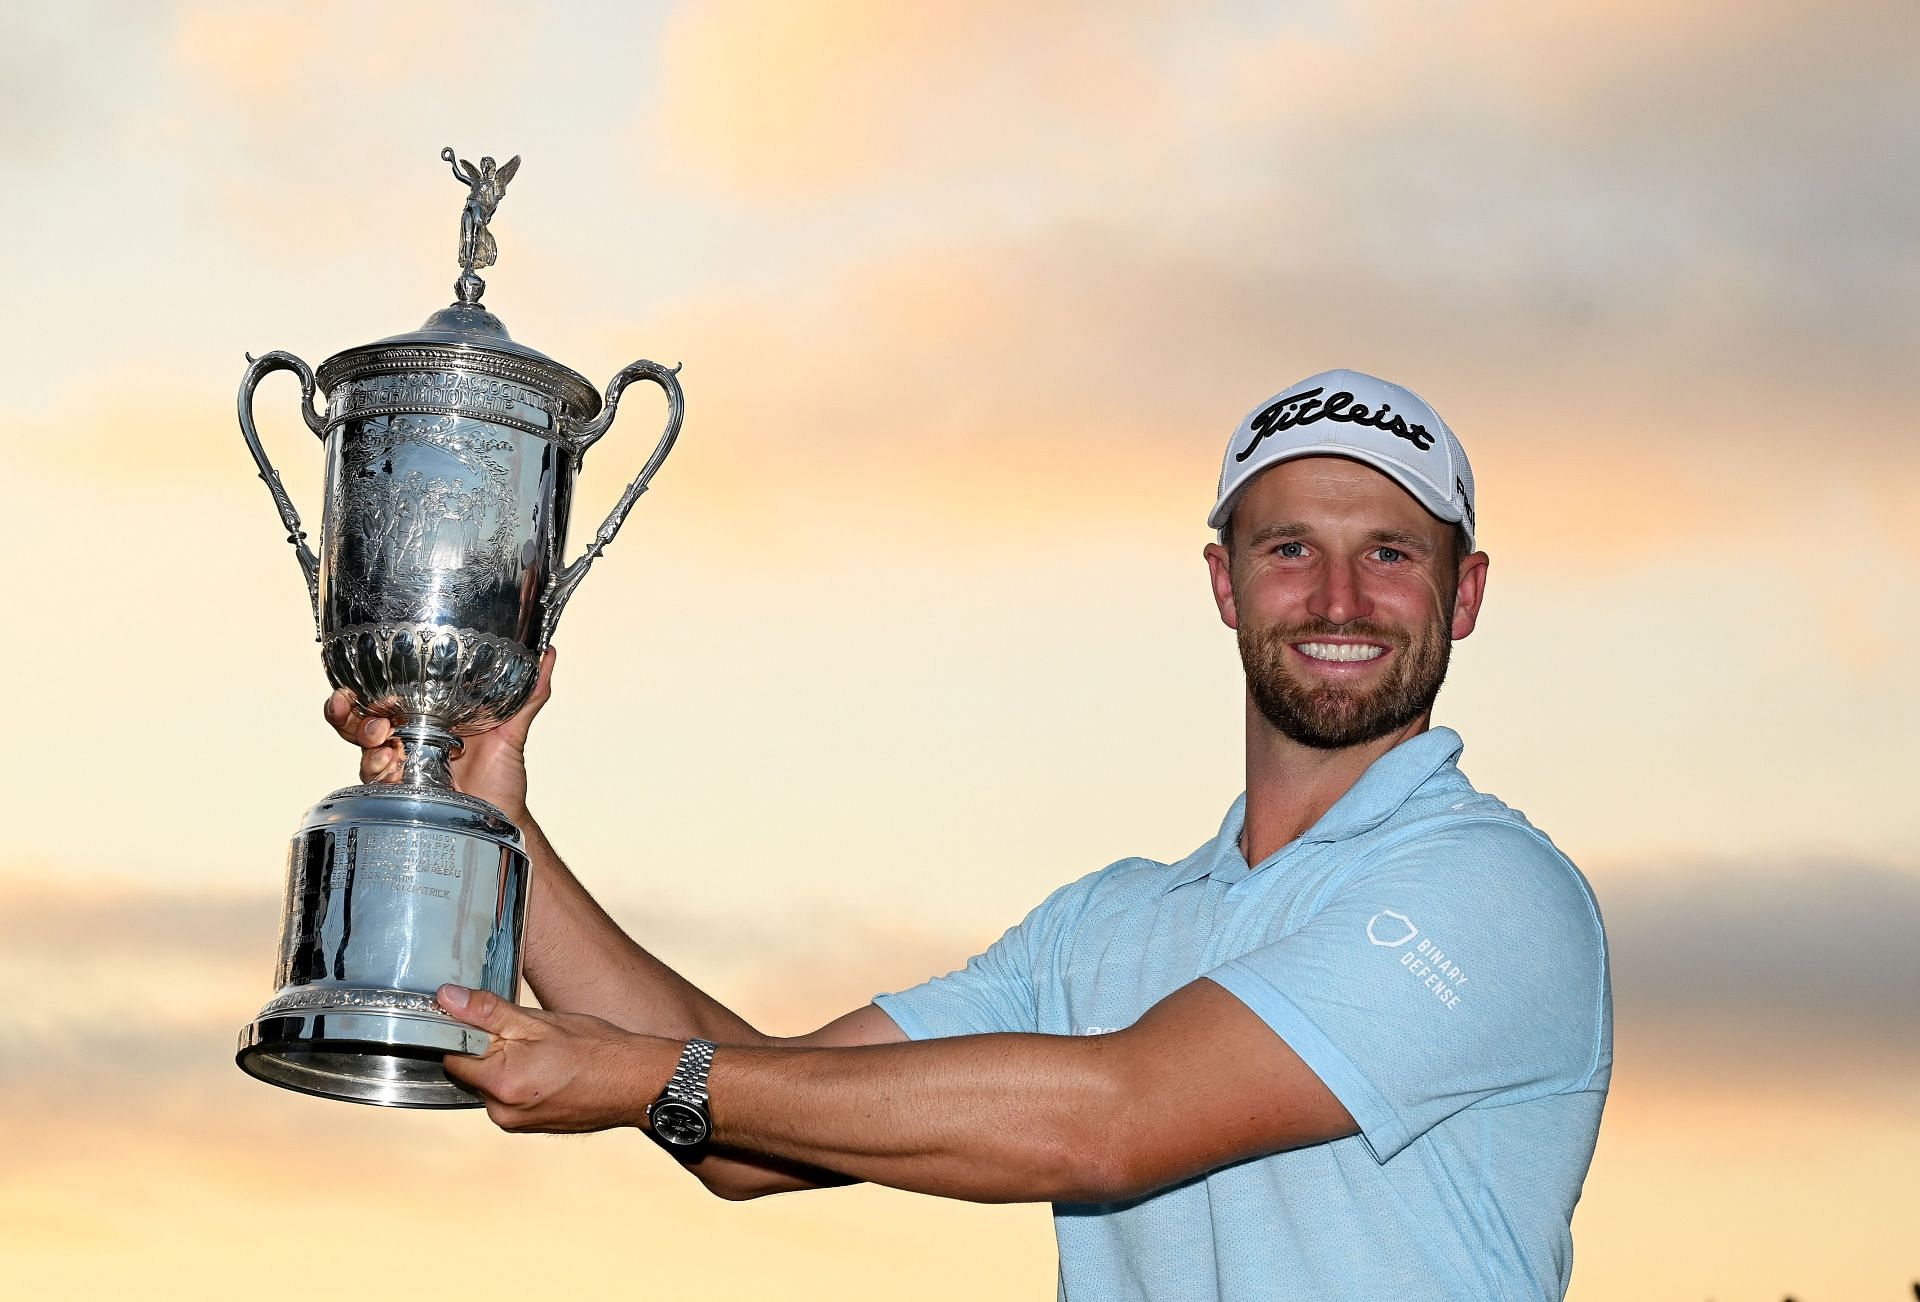 Clark with the U.S. Open Championship trophy (via Getty Images)